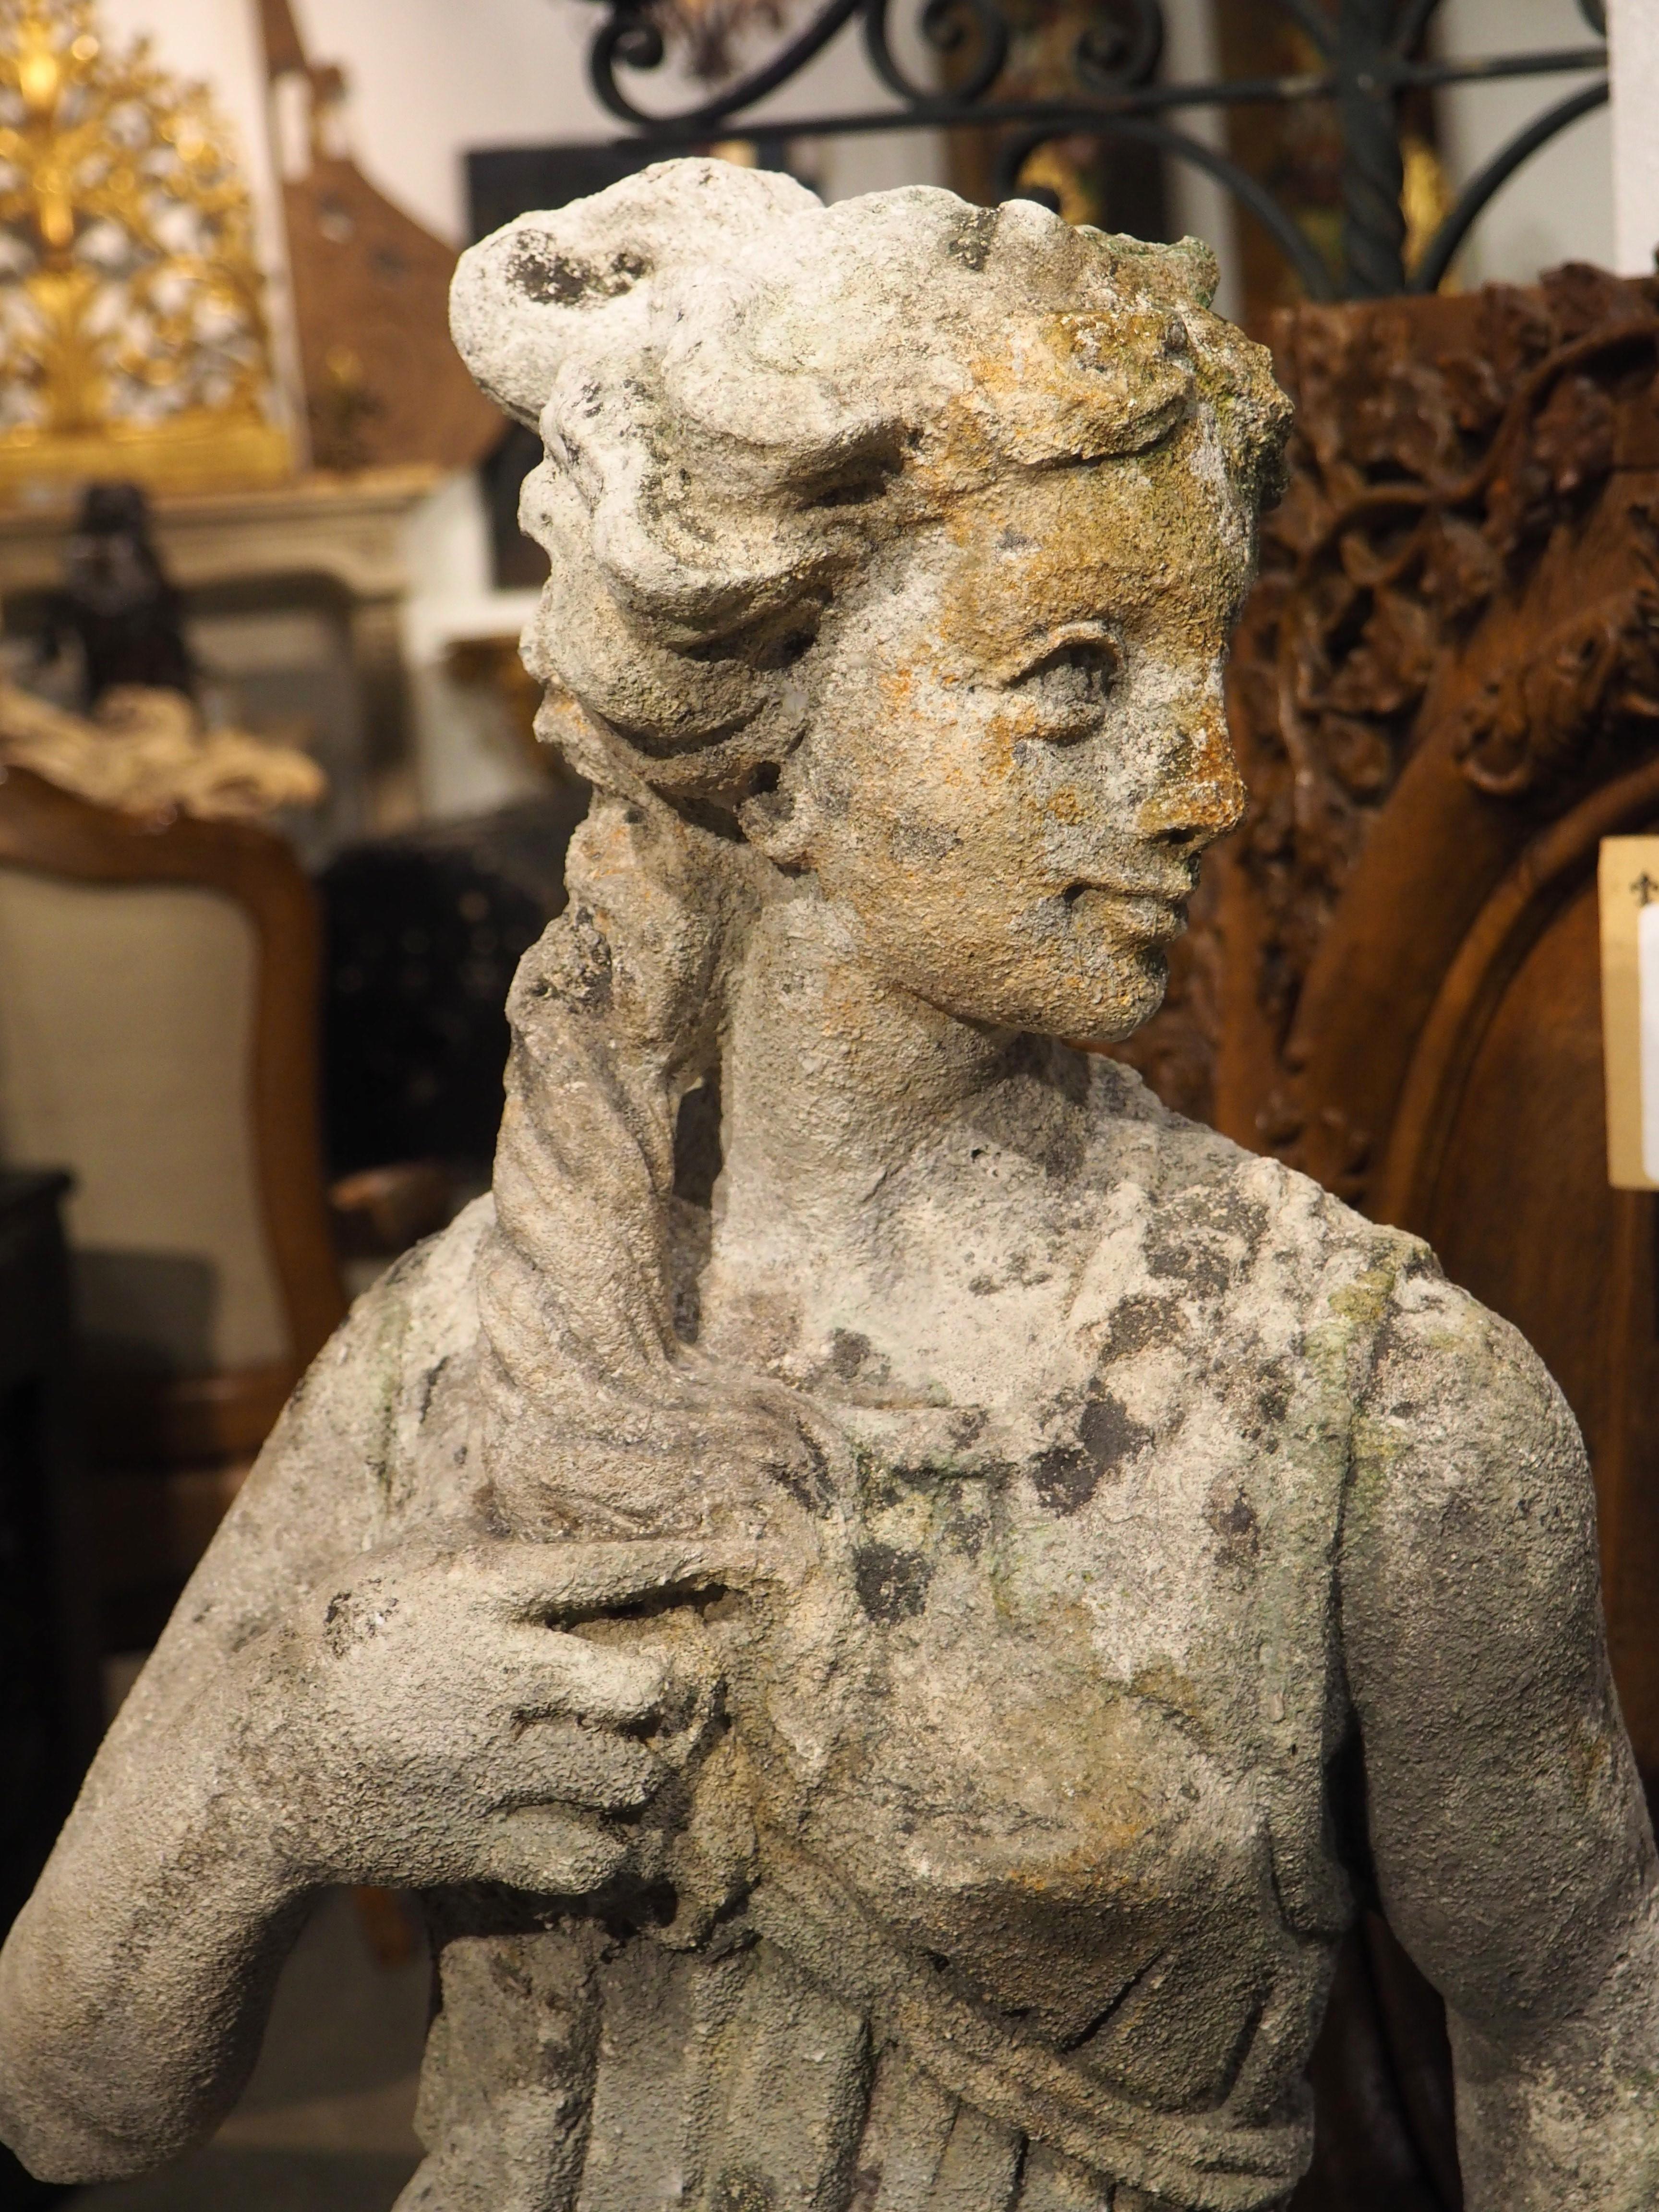 Hand-carved from Italian limestone, circa 1890, this beautiful Neoclassical statue is a unique interpretation of the famous Diana of Versailles statue (the 1st or 2nd-century marble, which is itself a copy of a lost bronze sculpture dating to 325